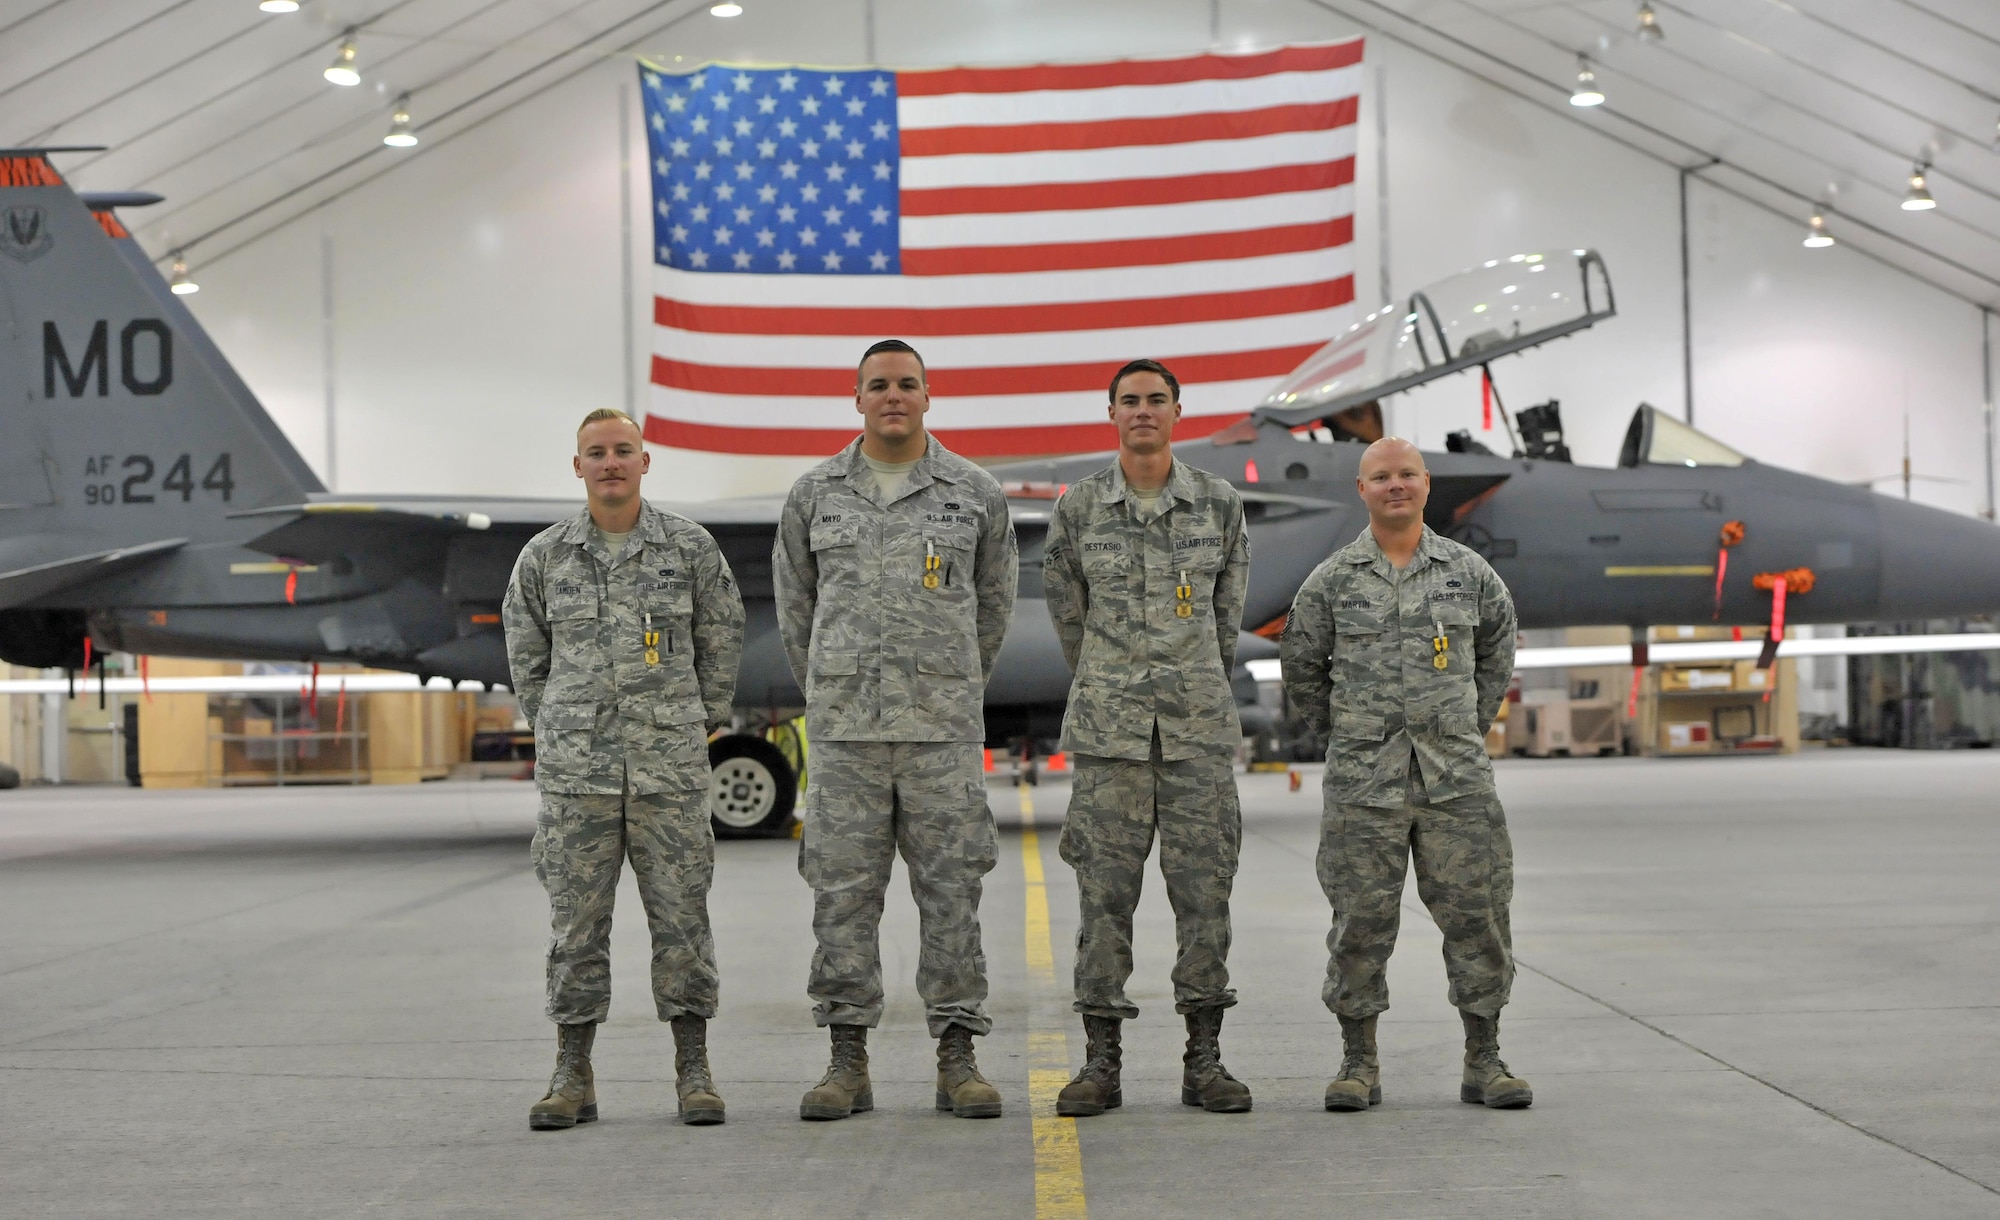 Senior Airmen Nash Camden, Matthew Mayo, Blake Destasio and Tech. Sgt. Kyle Martin, left to right respectively, pose for a photo after an awards ceremony at an undisclosed location in Southwest Asia, Feb. 16, 2016. The four Airmen were part of a group of nine maintainers from the 380th Expeditionary Aircraft Maintenance Squadron who were recognized for their efforts when they responded to a fire caused by a hydraulic fluid leak on an F-15E Strike Eagle fighter after it returned from a sortie December 2015. (U.S. Air Force photo by Staff Sgt. Kentavist P. Brackin/Released)